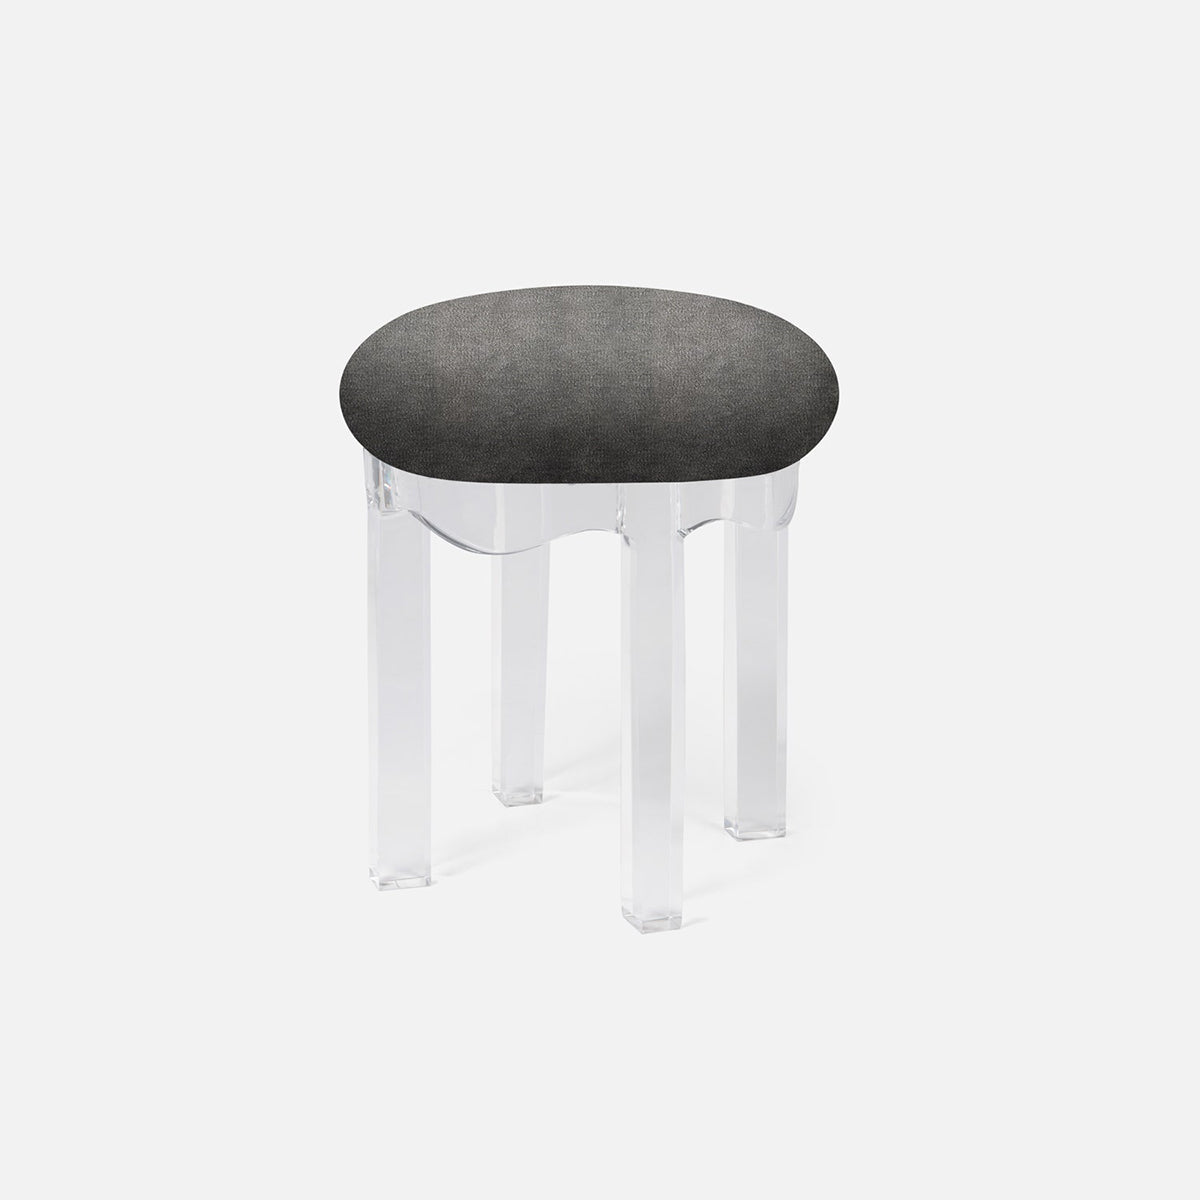 Made Goods Marston Upholstered Round Single Bench in Humboldt Cotton Jute